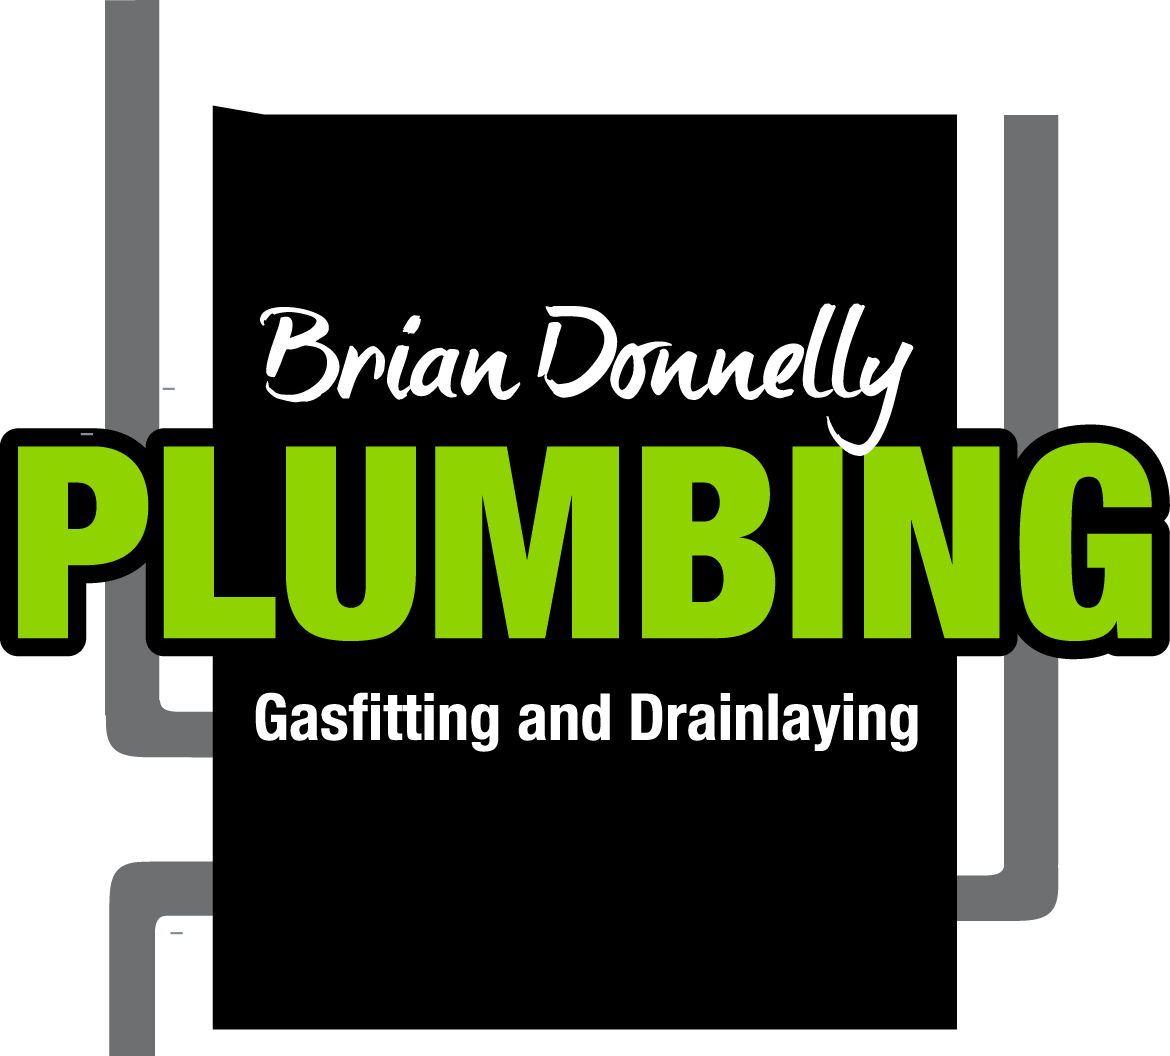 Brian Donnelly Plumbing